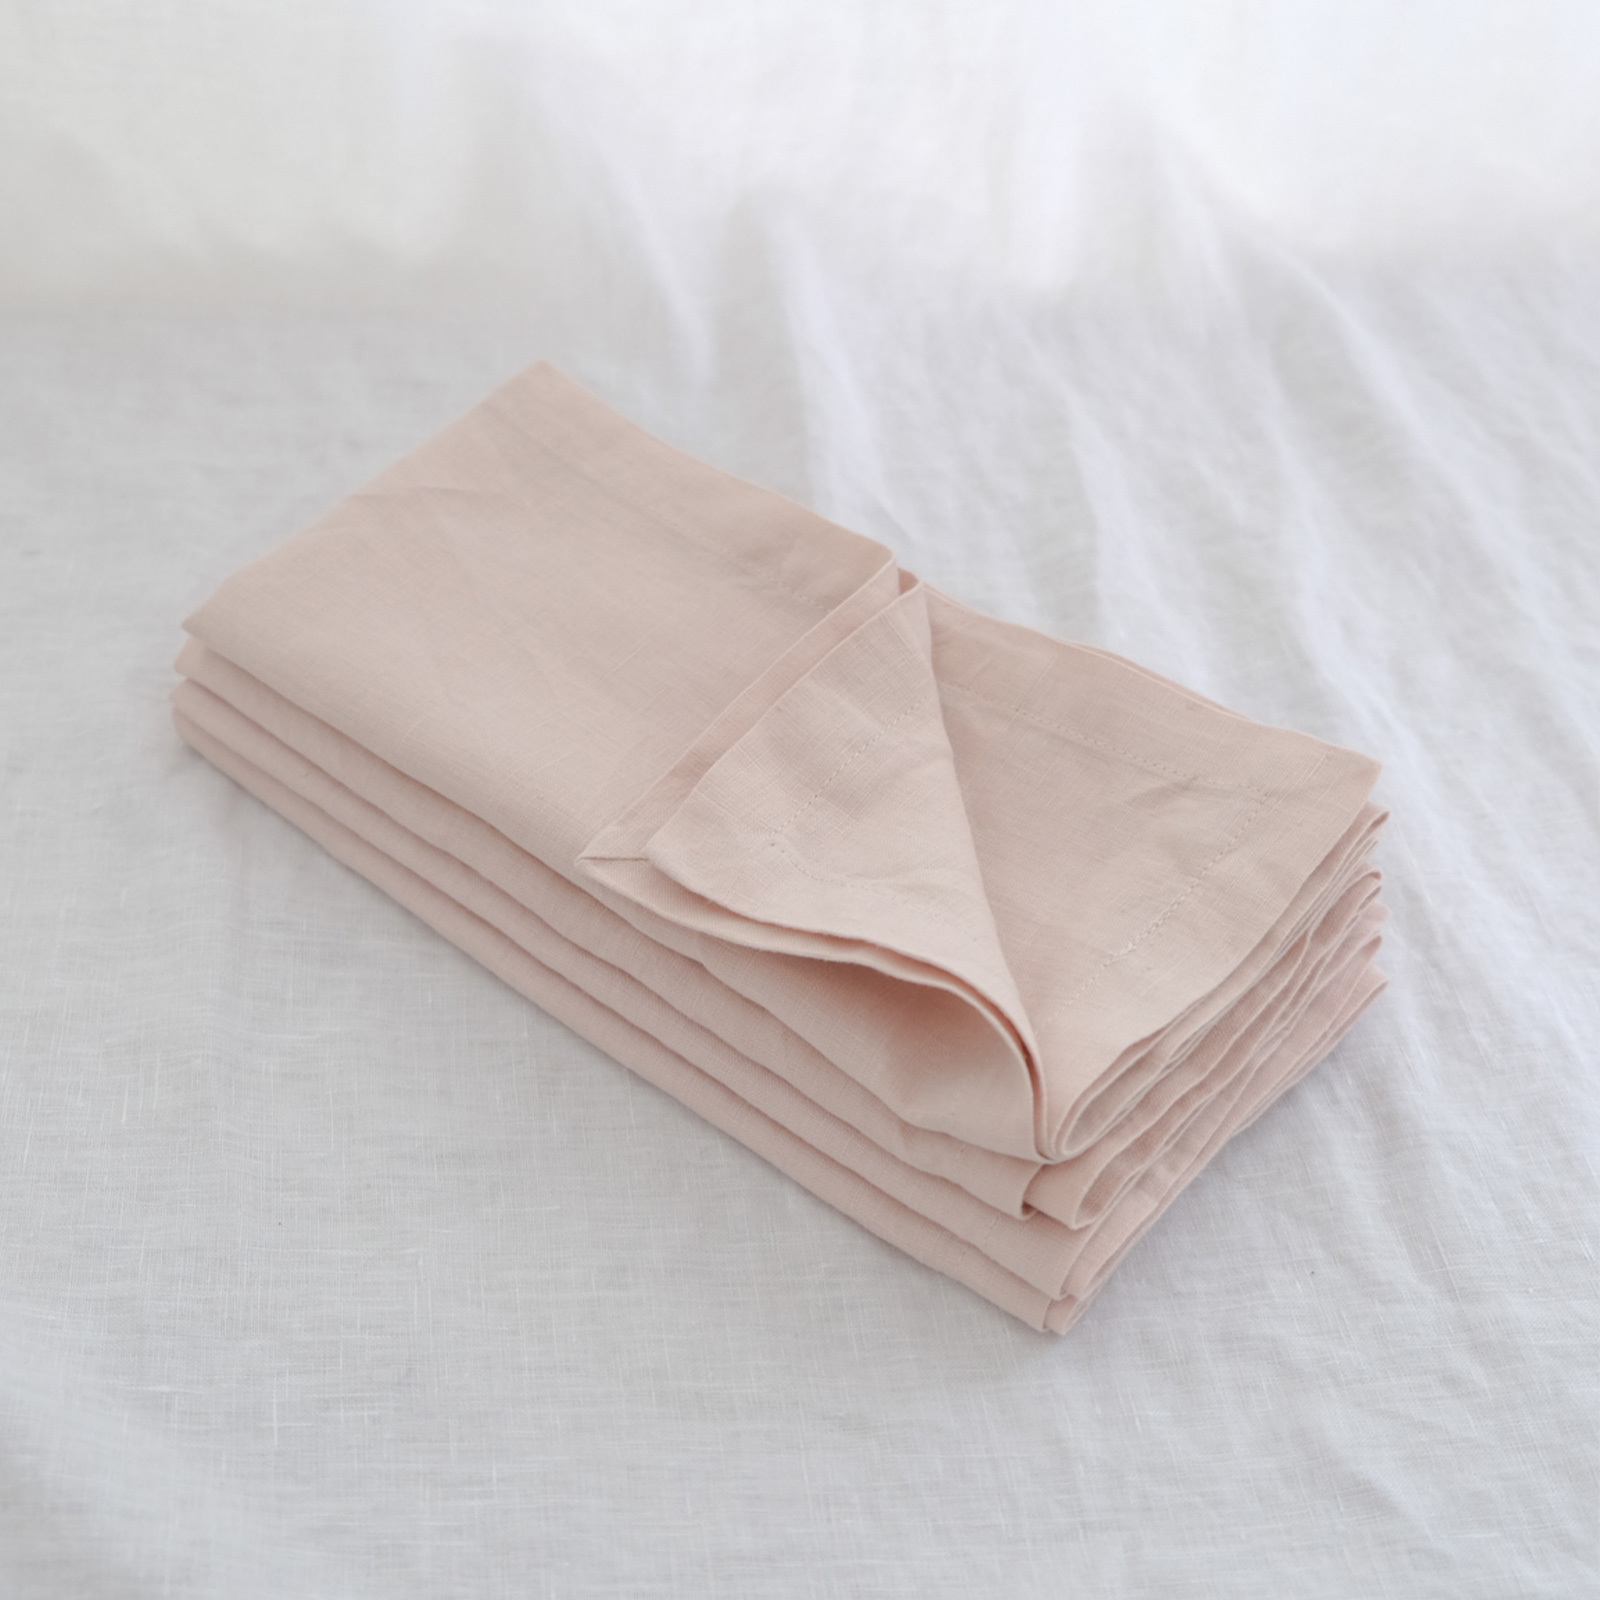 Pure French linen Napkins in Blush (set of 4)